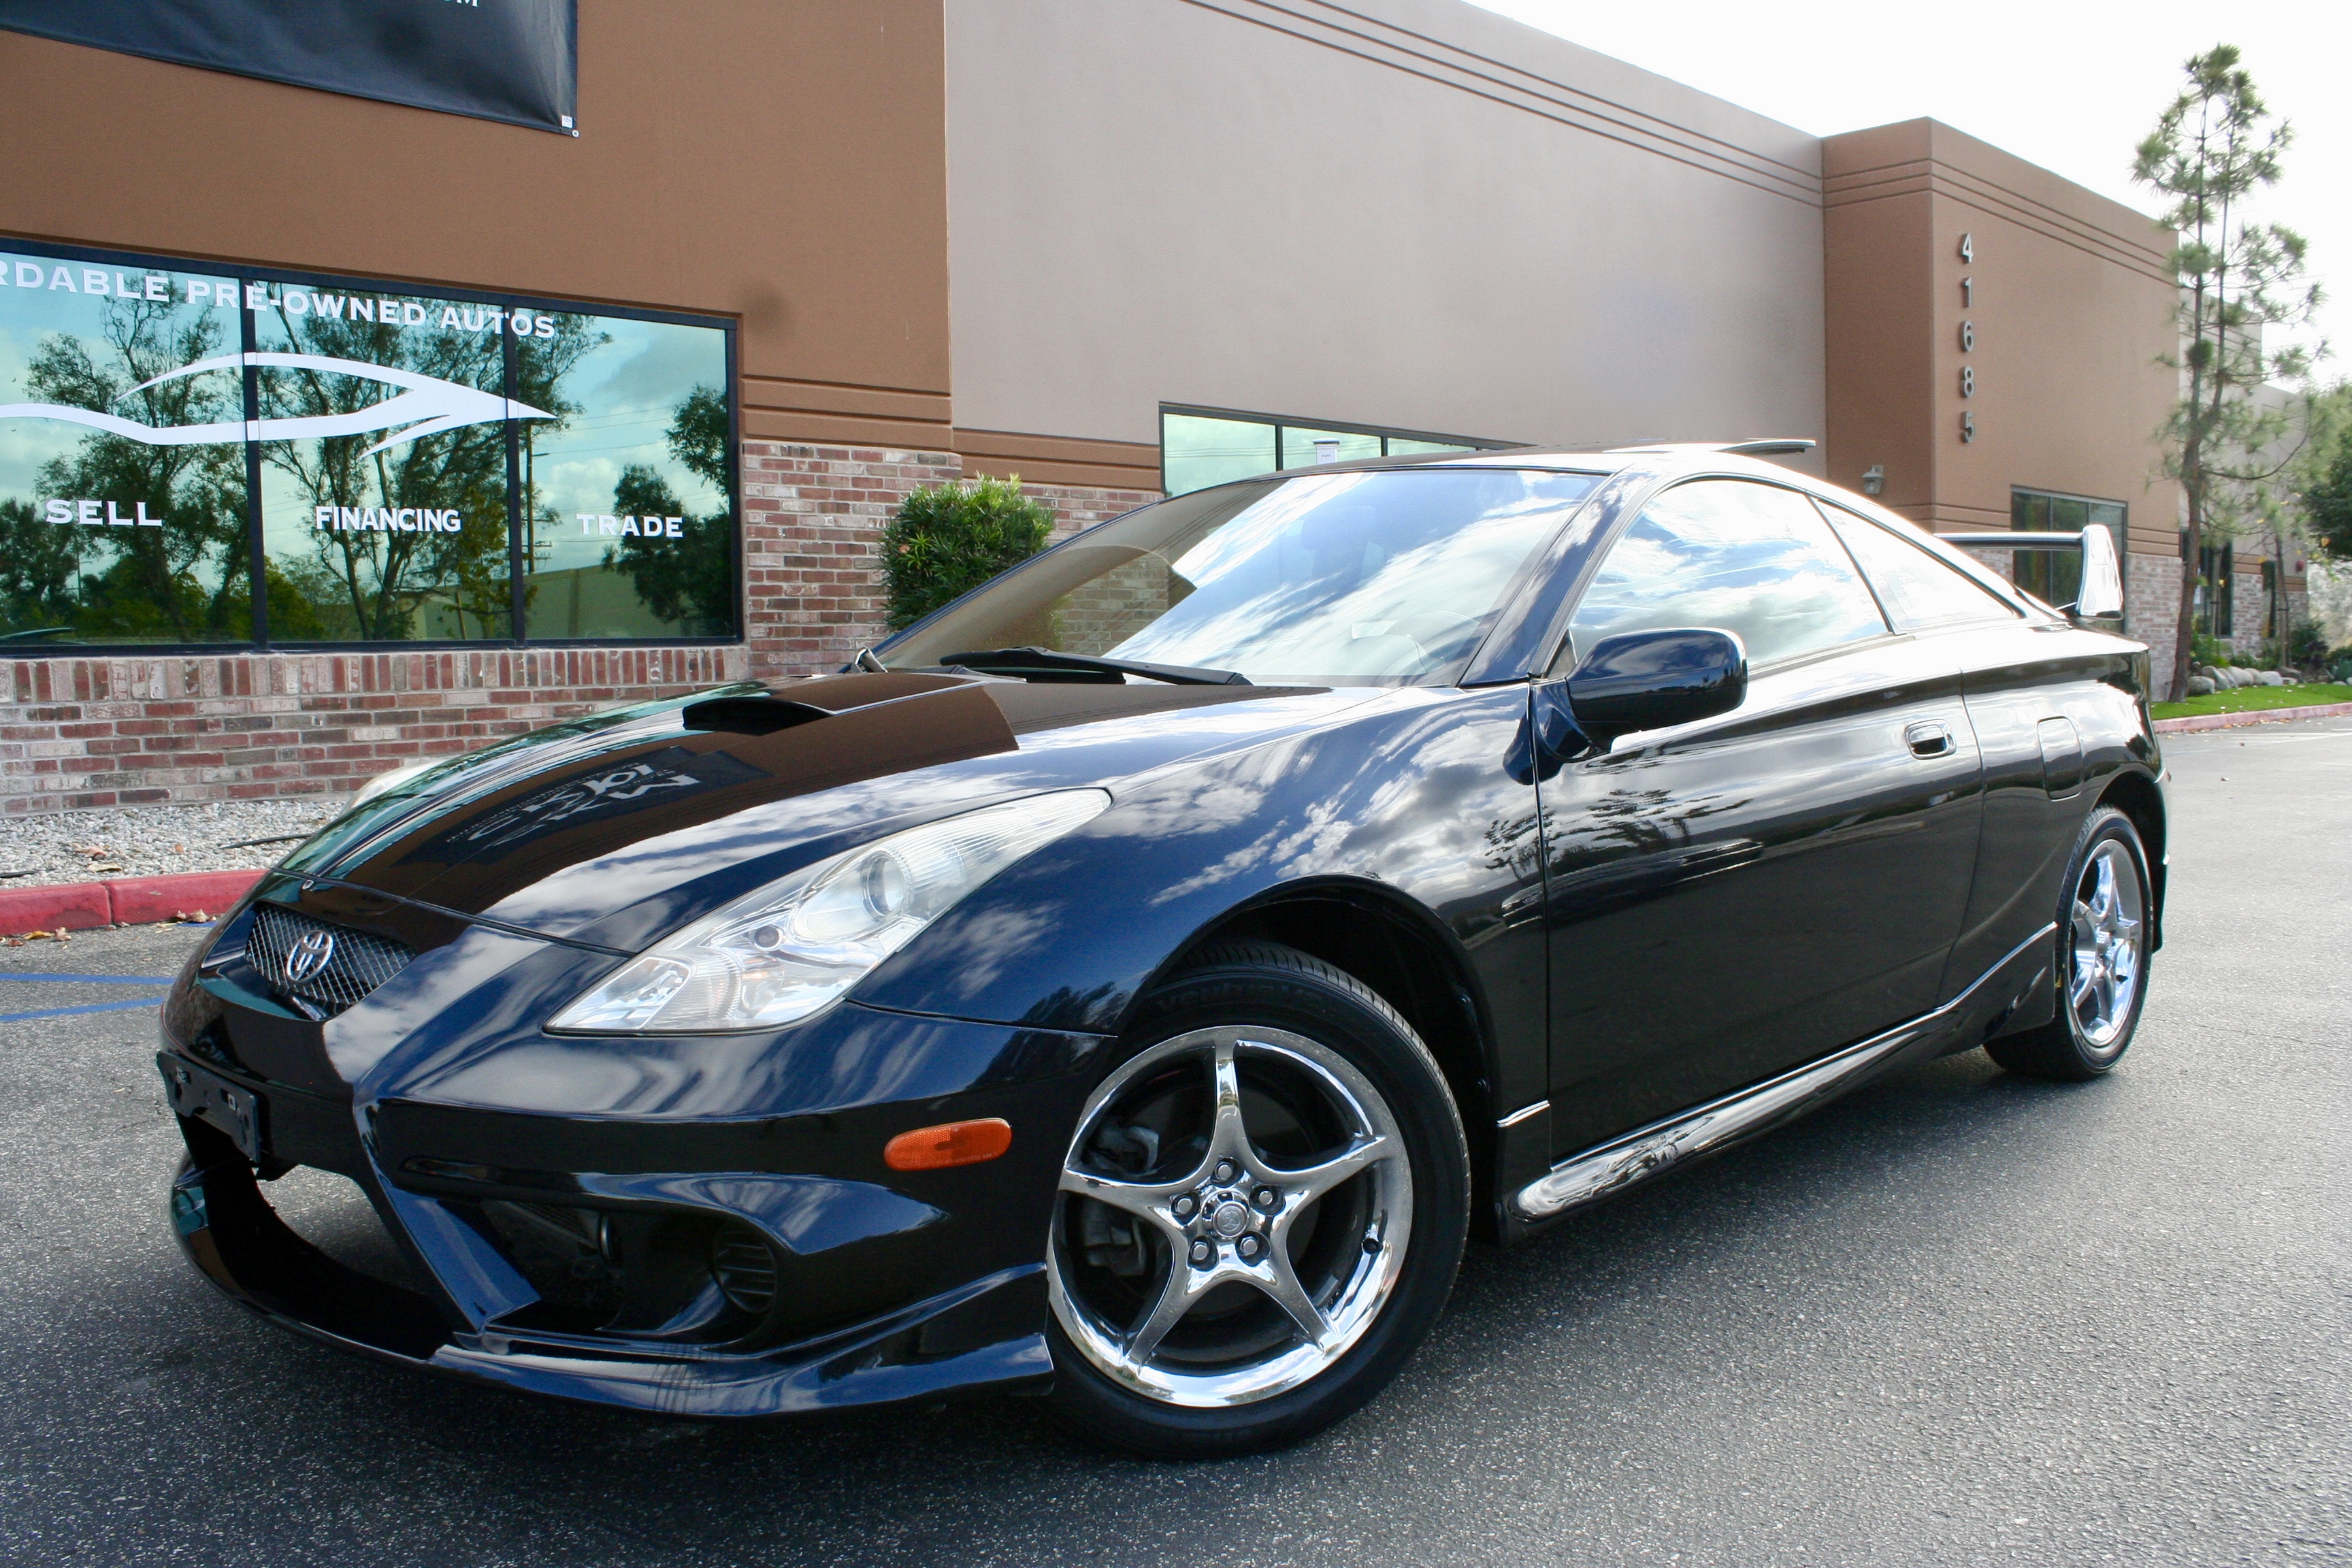 Used Toyota Celica for Sale - Kelley Blue Book